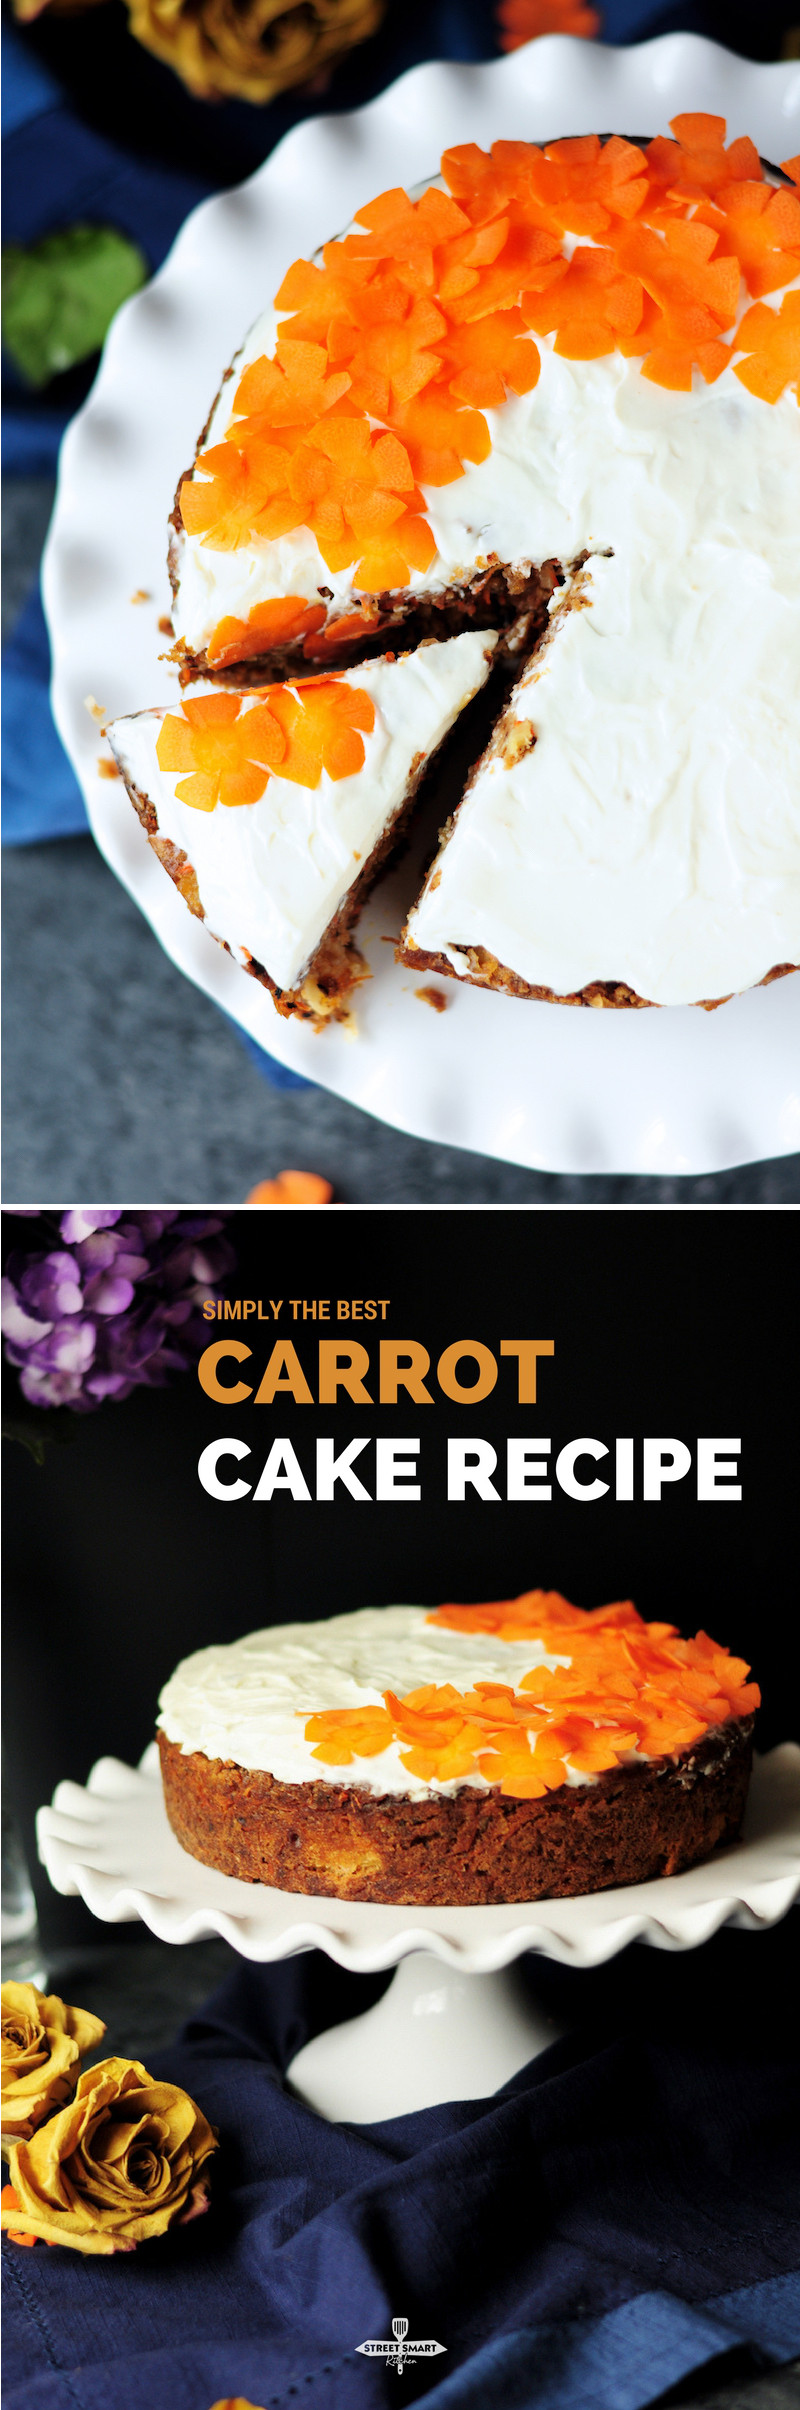 This is hands-down the best carrot cake recipe you will ever make. It's so incredibly moist and delicious that everyone will beg for.